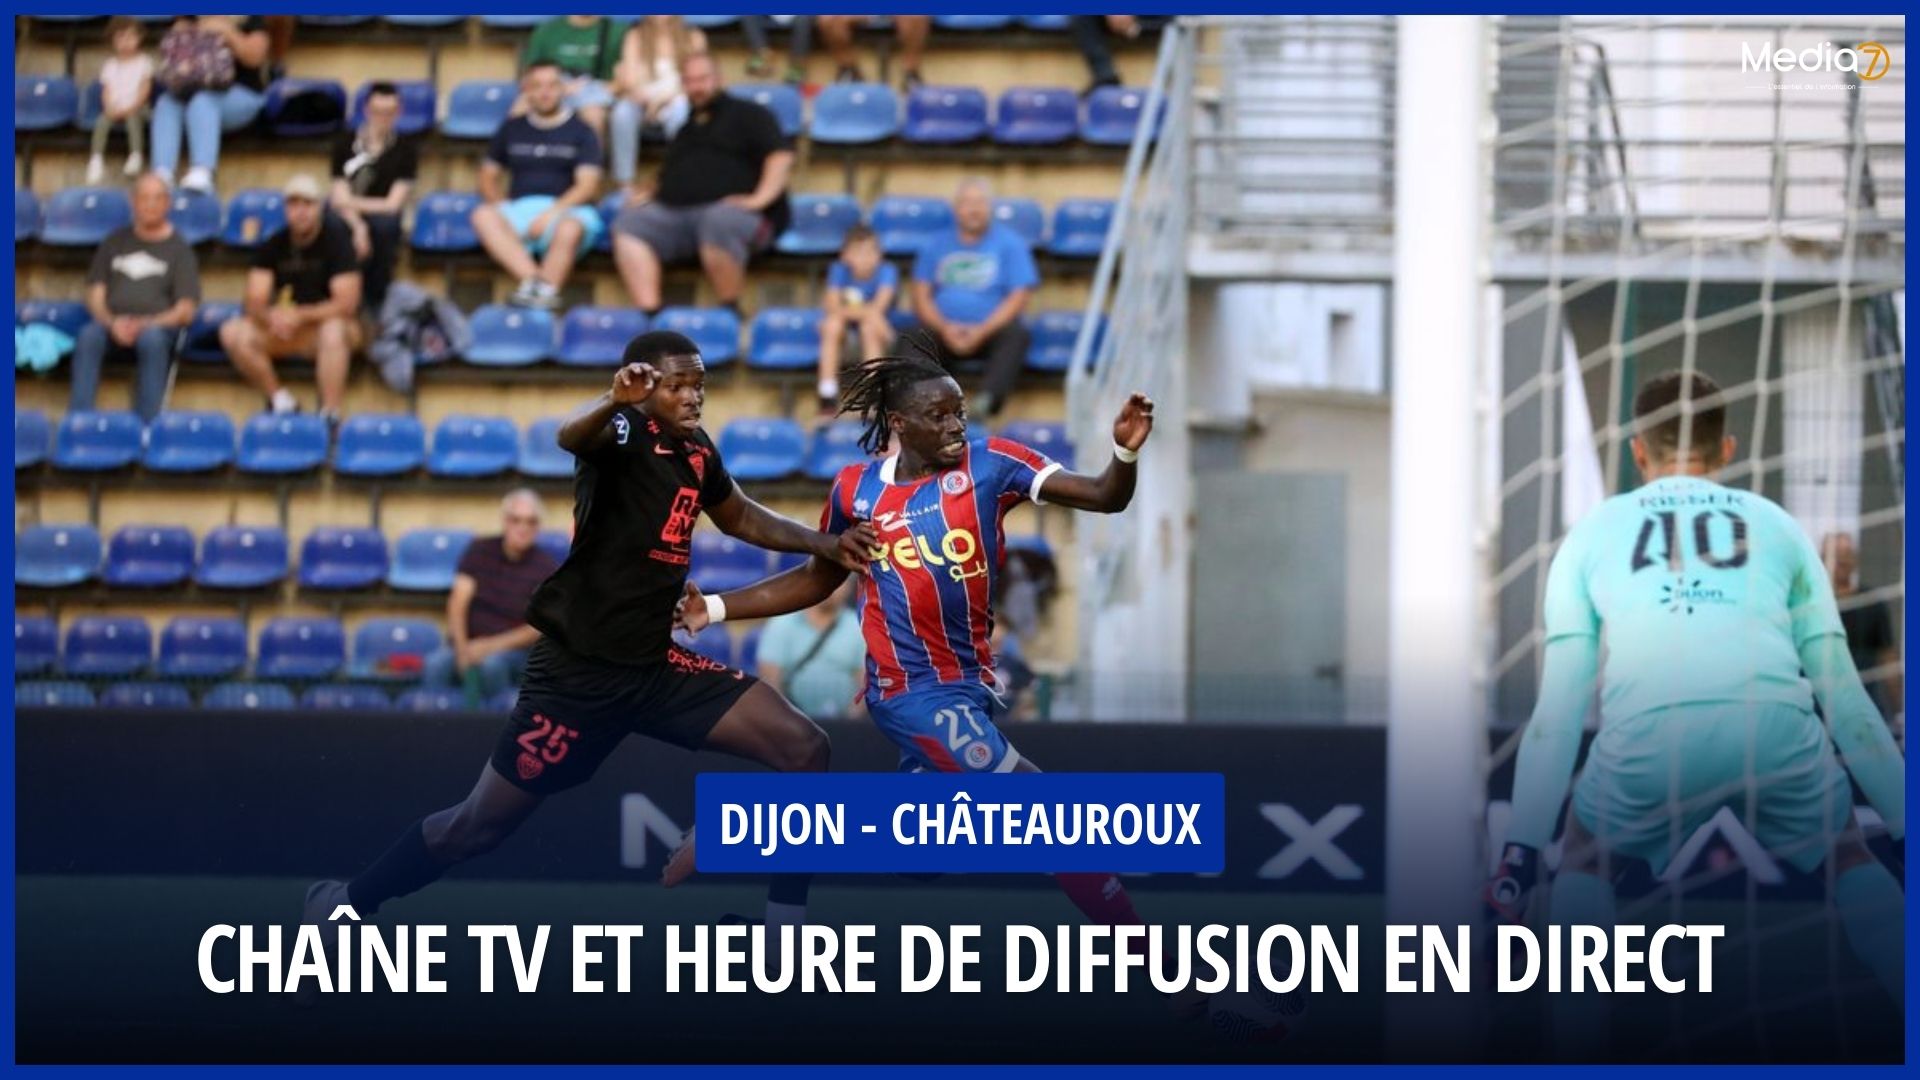 Match Dijon - Châteauroux Live: TV Channel and Broadcast Schedule - Media7